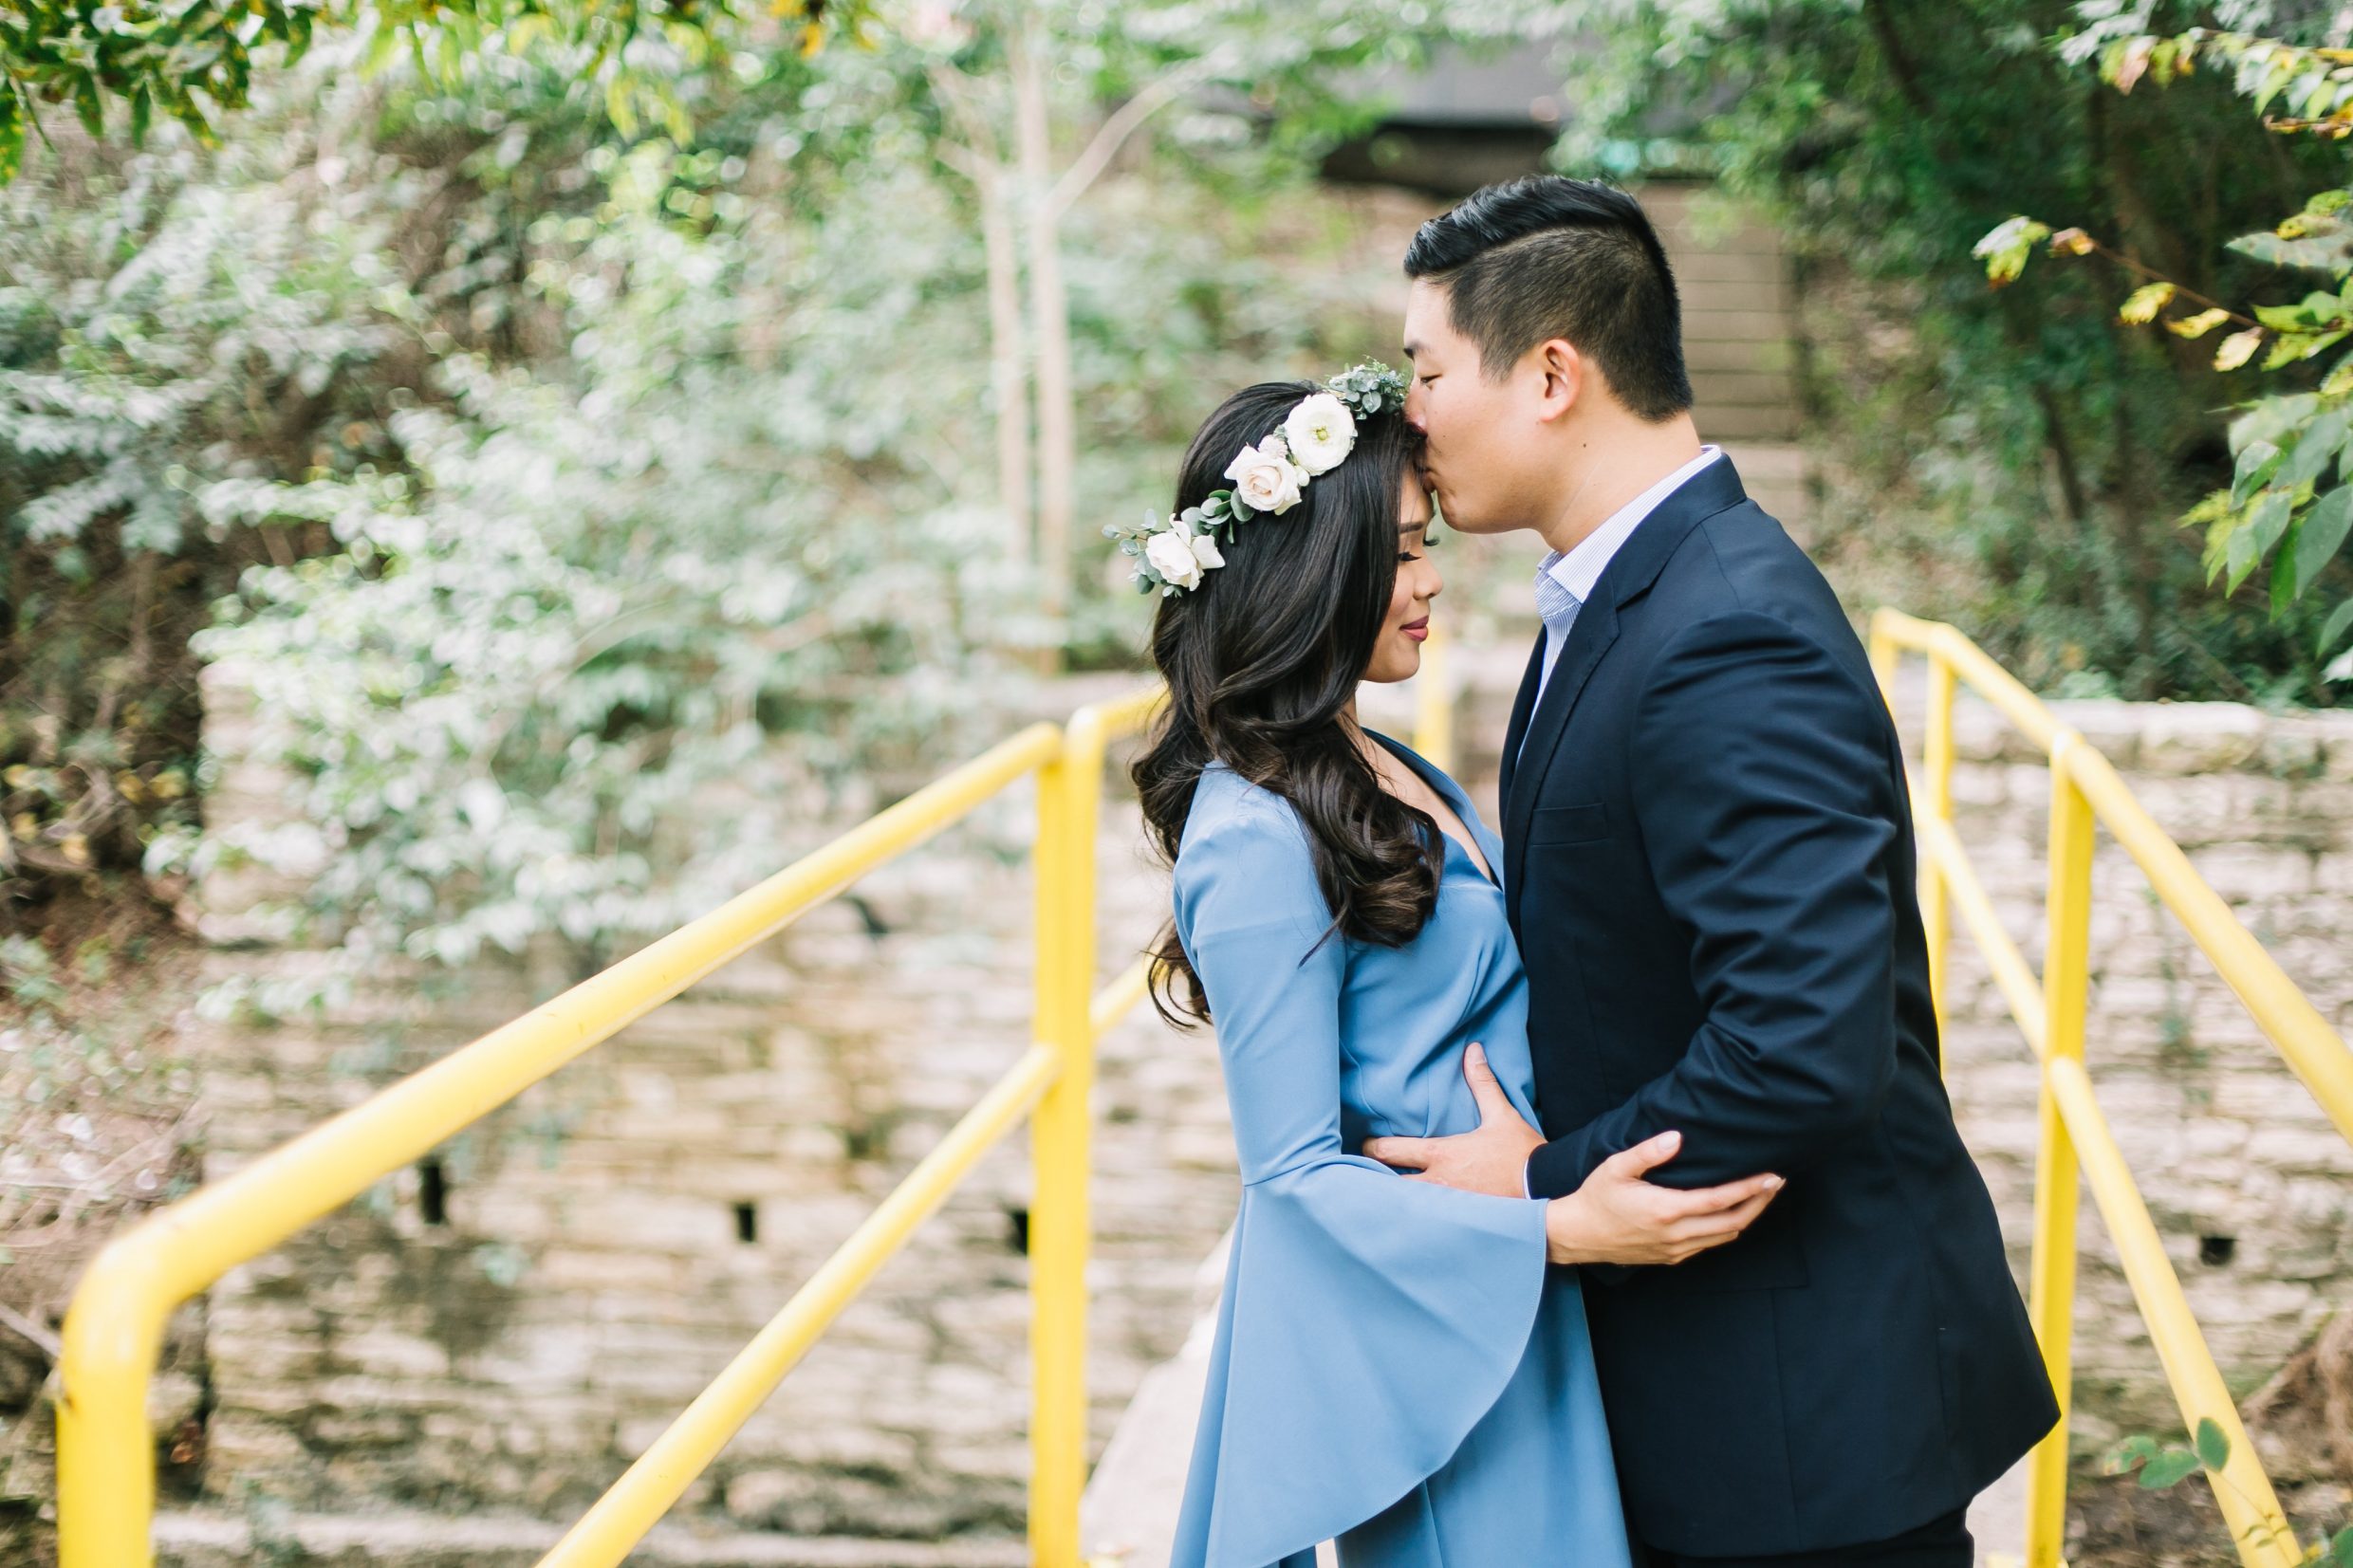 styled,shoot,engagement,wedding,rose,flower,crown,austin,texas,photographer,wedding,jcrew,suit,style,me,pretty,milly,nicole,bell,sleeve,bellsleeved,dress,periwinkle,stuart,weitzman,whimsical,fairy,woods,nature,photograhy,bride,groom,navy,blue,brandon,hill,photography,